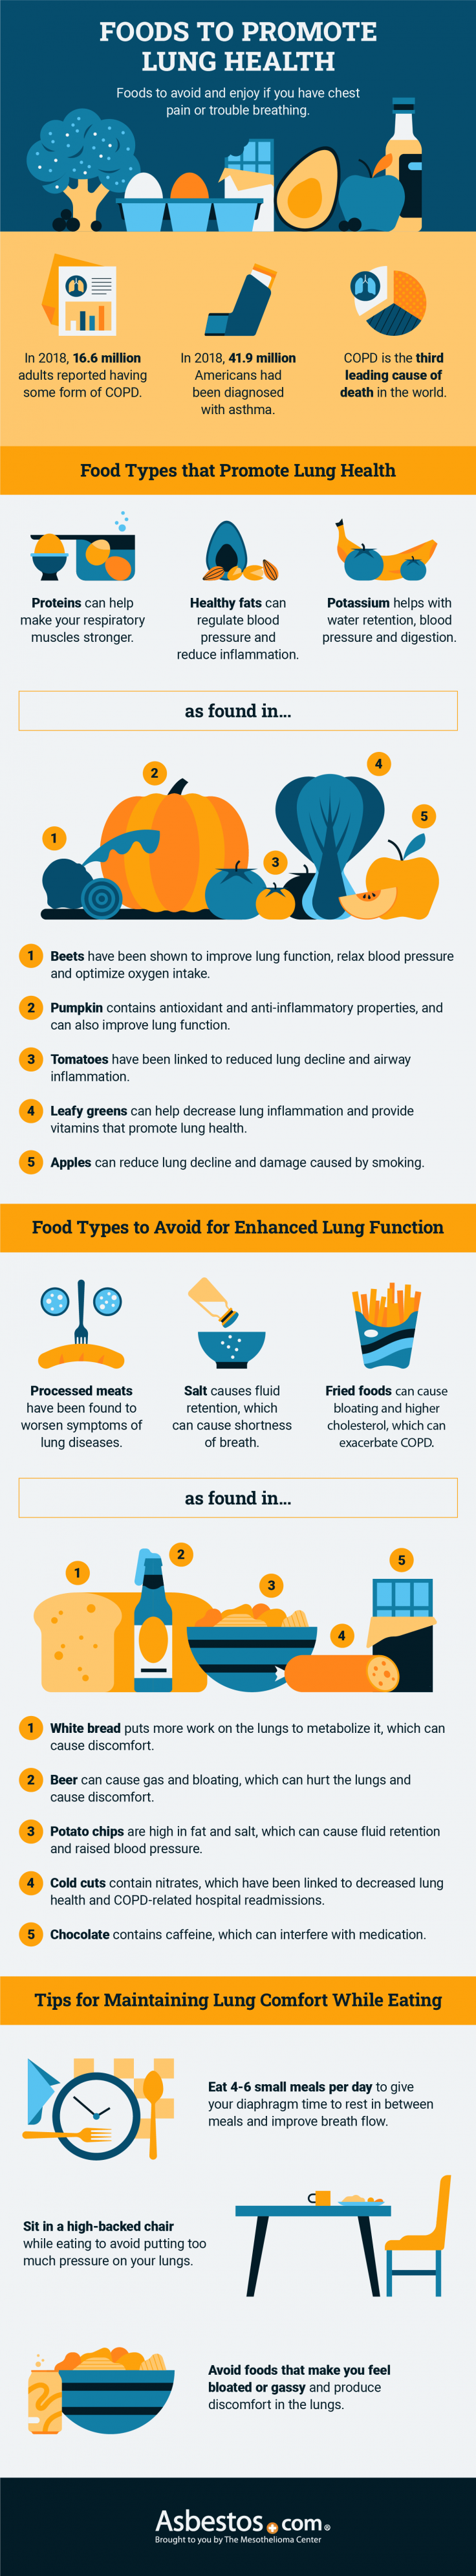 Best foods for lung health infographic